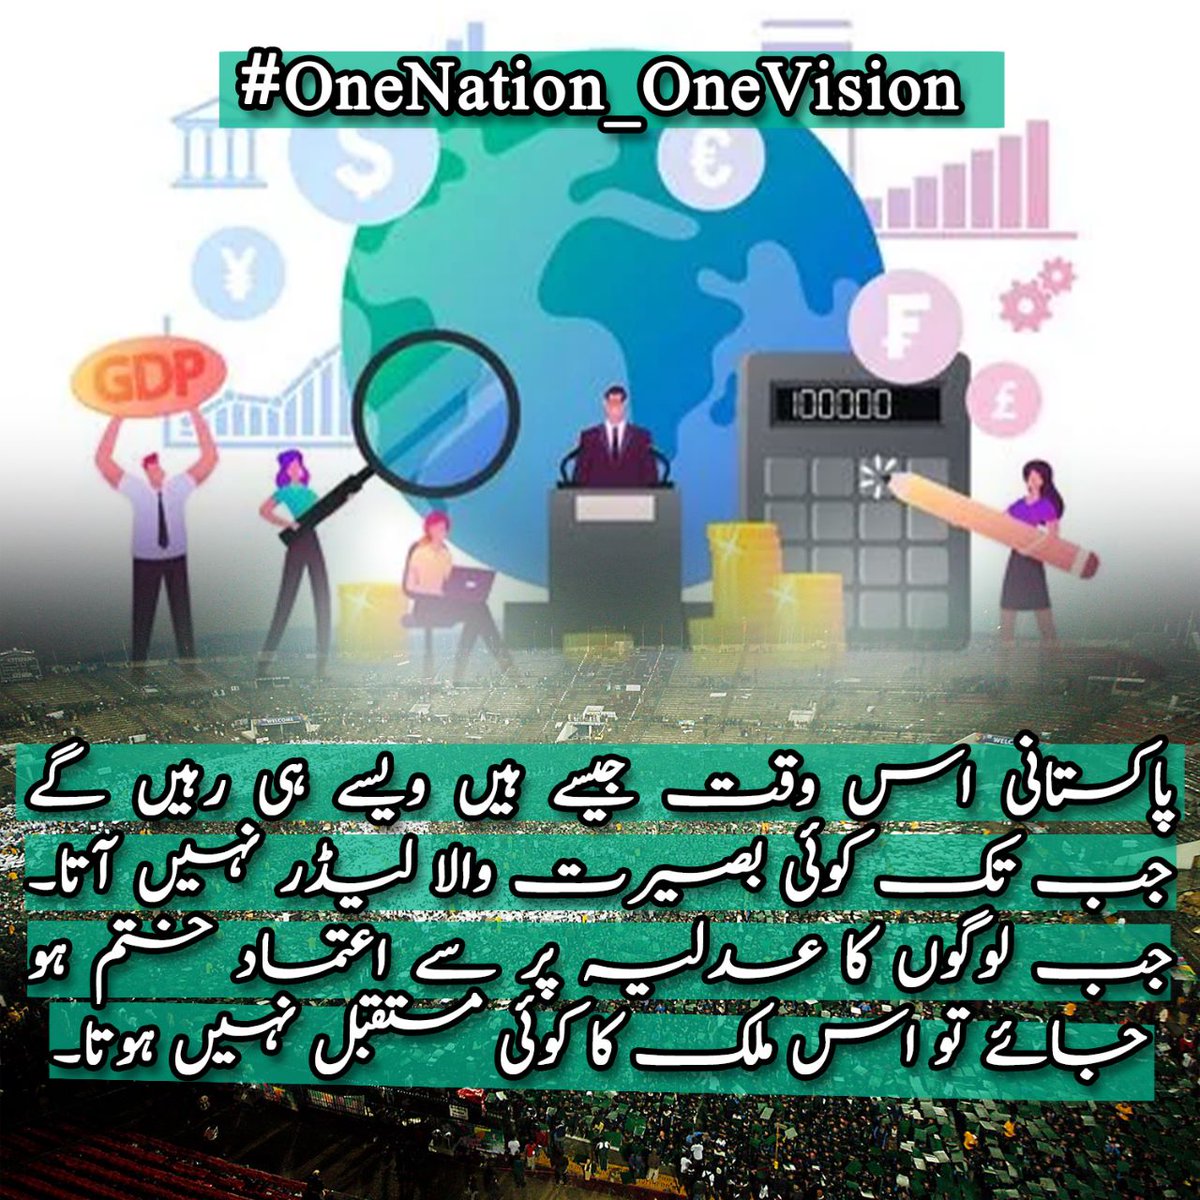 #OneNation_OneVision 
Pakistan today faces formidable social, economic, security and governance challenges.